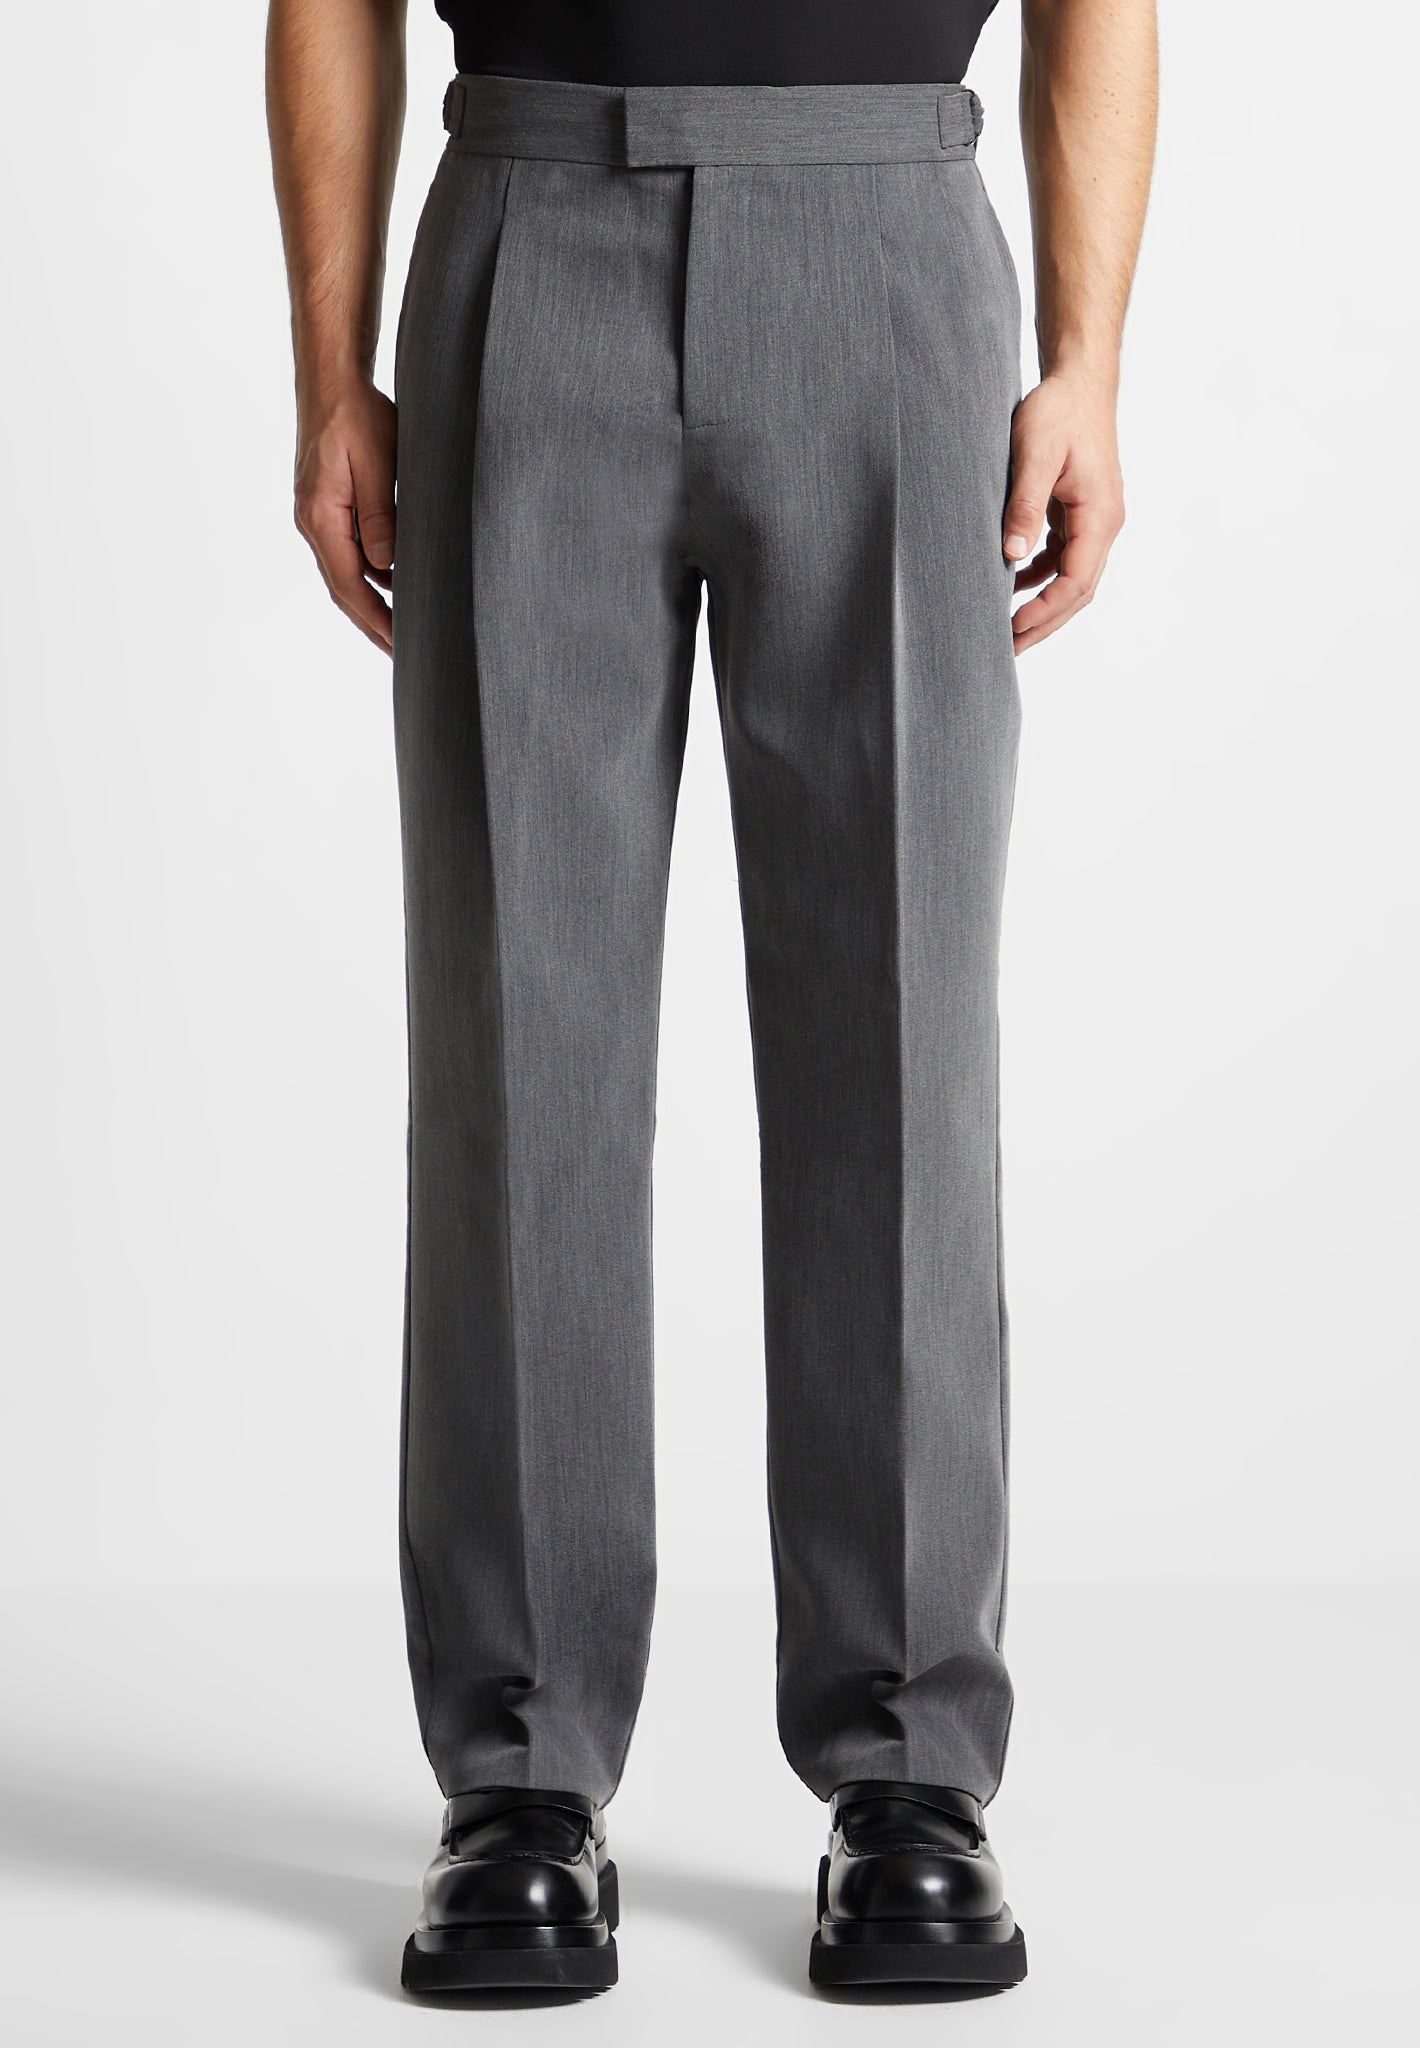 Gibson London | Navy Pleated Suit Trousers | Suit Direct